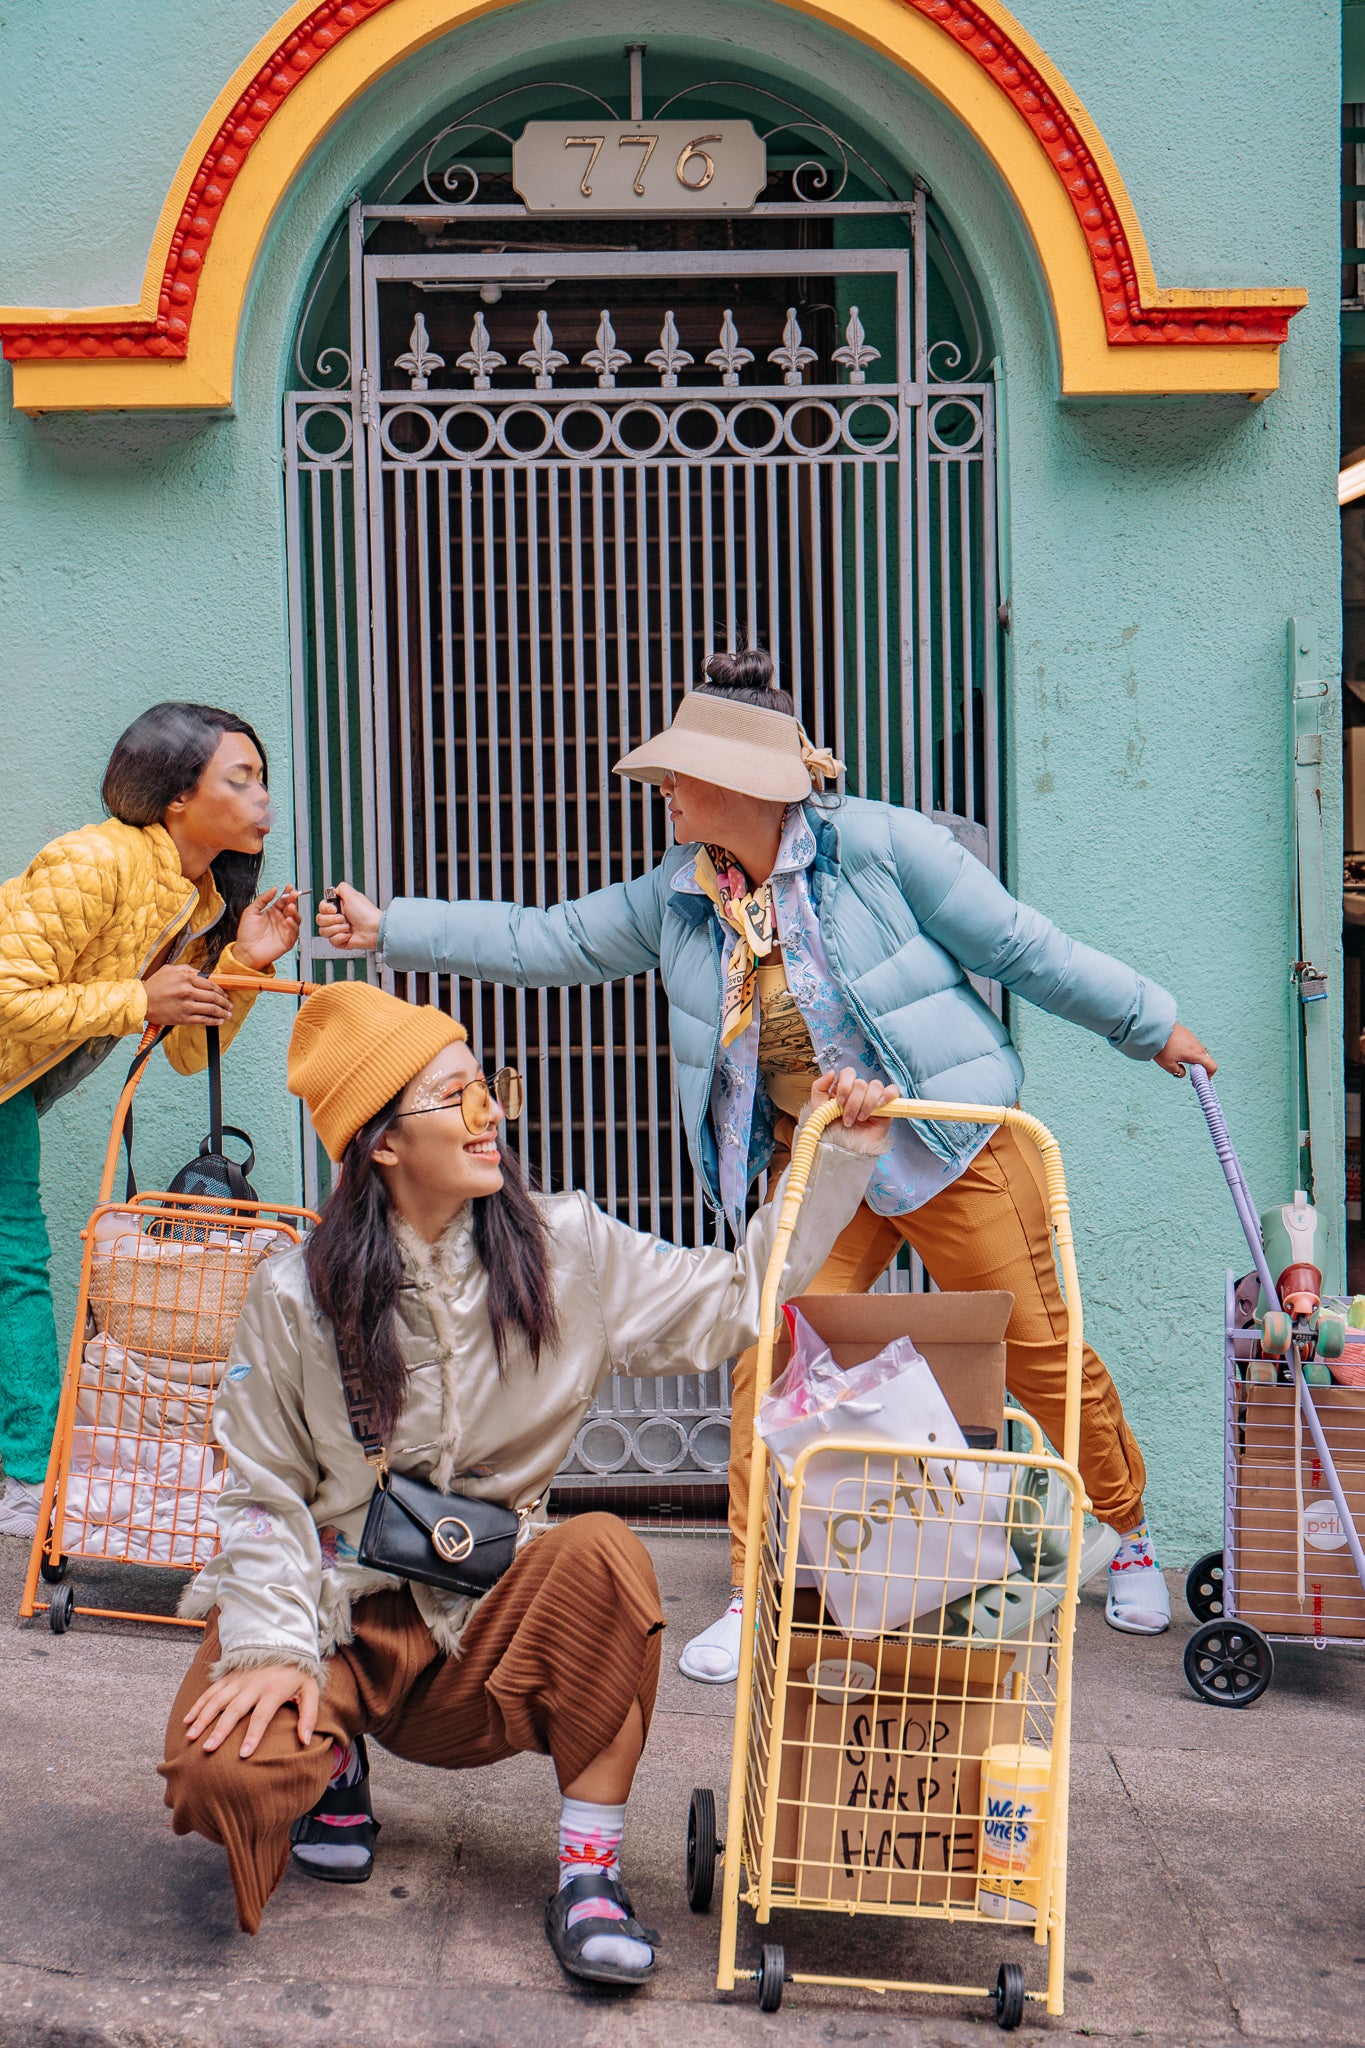 Three stylish people with shopping carts in a colorful urban setting.